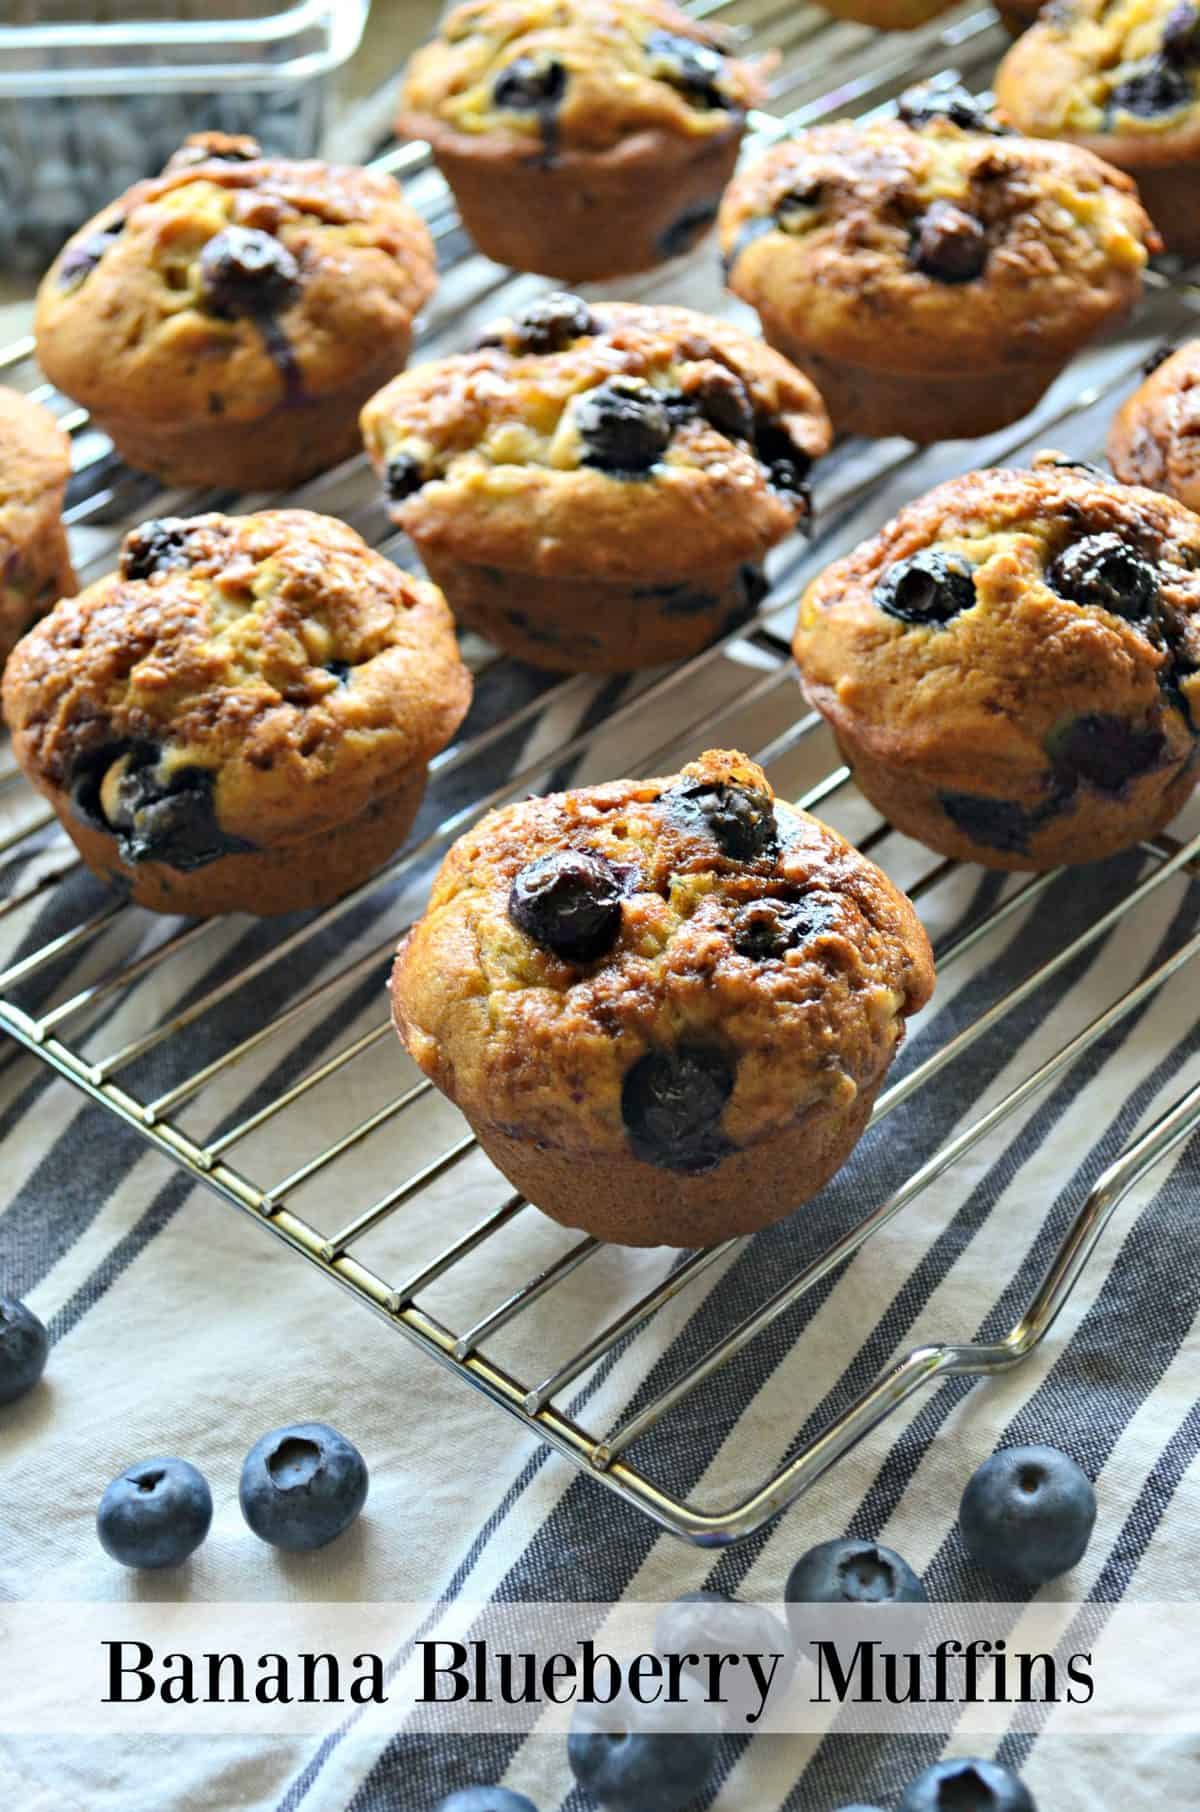 closeup side view of Banana Blueberry Muffins on metal resting rack with title text.